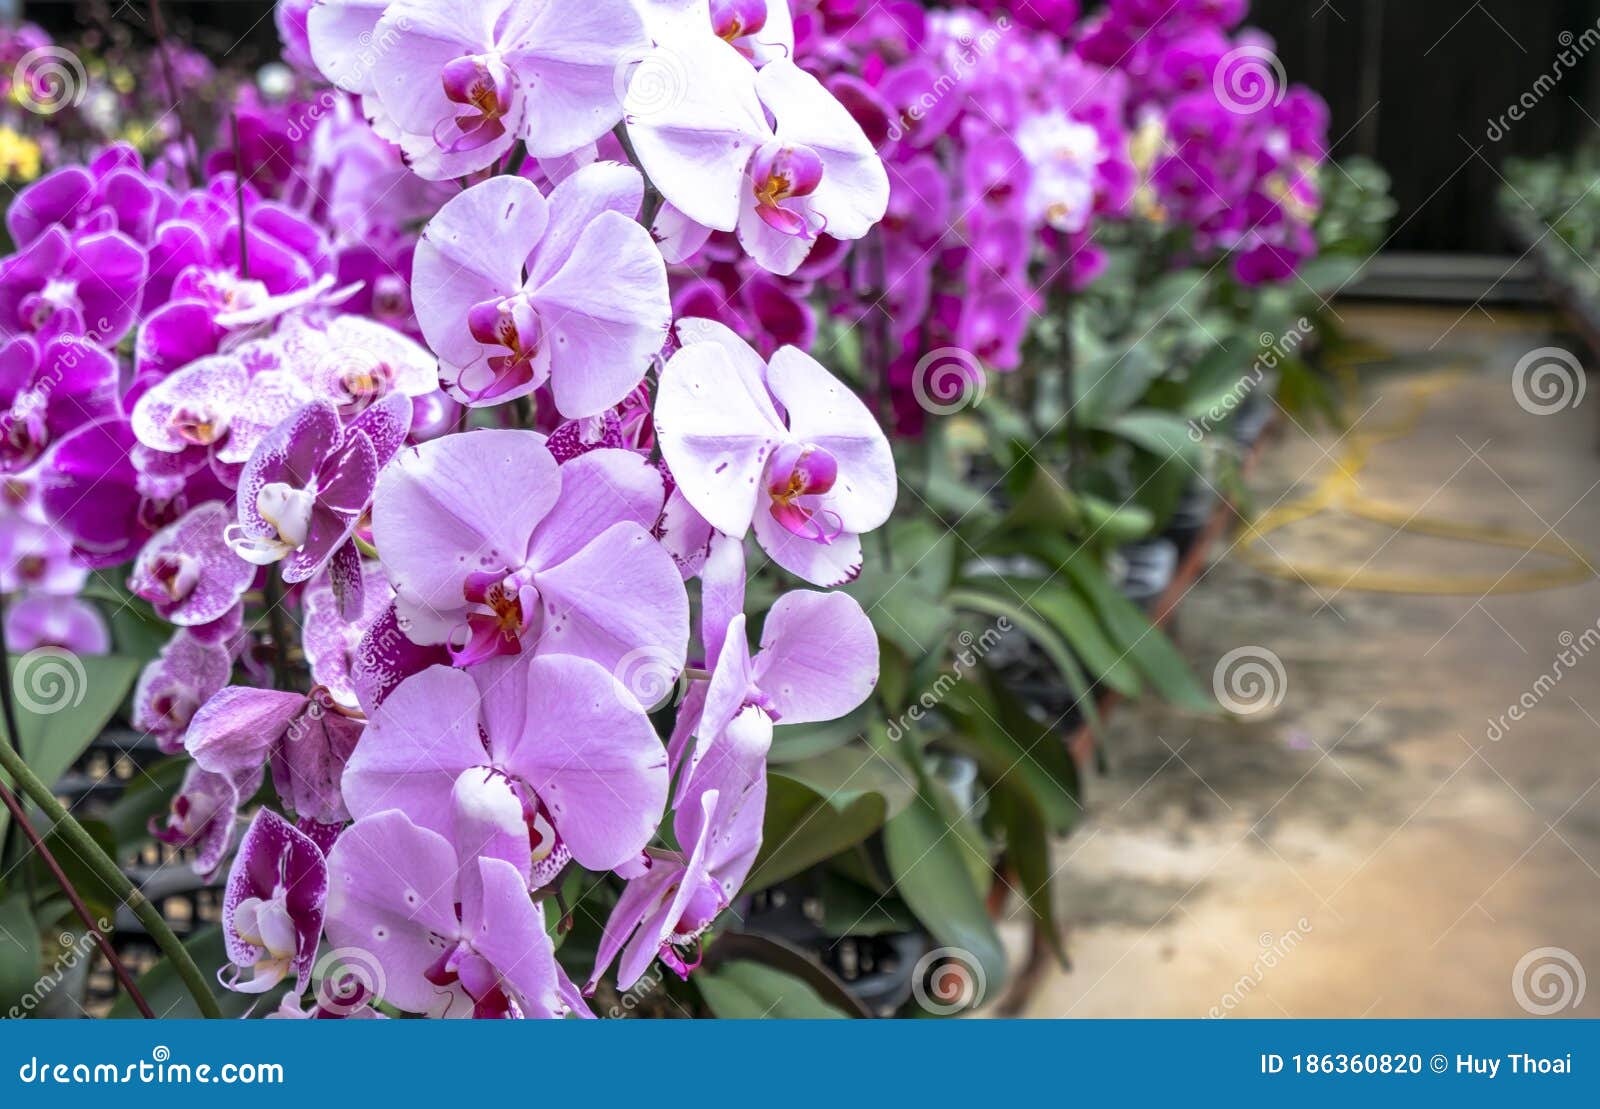 Phalaenopsis Orchids Bloom In A Variety Of Colors In The Garden Stock Photo Image Of Botany Home 186360820